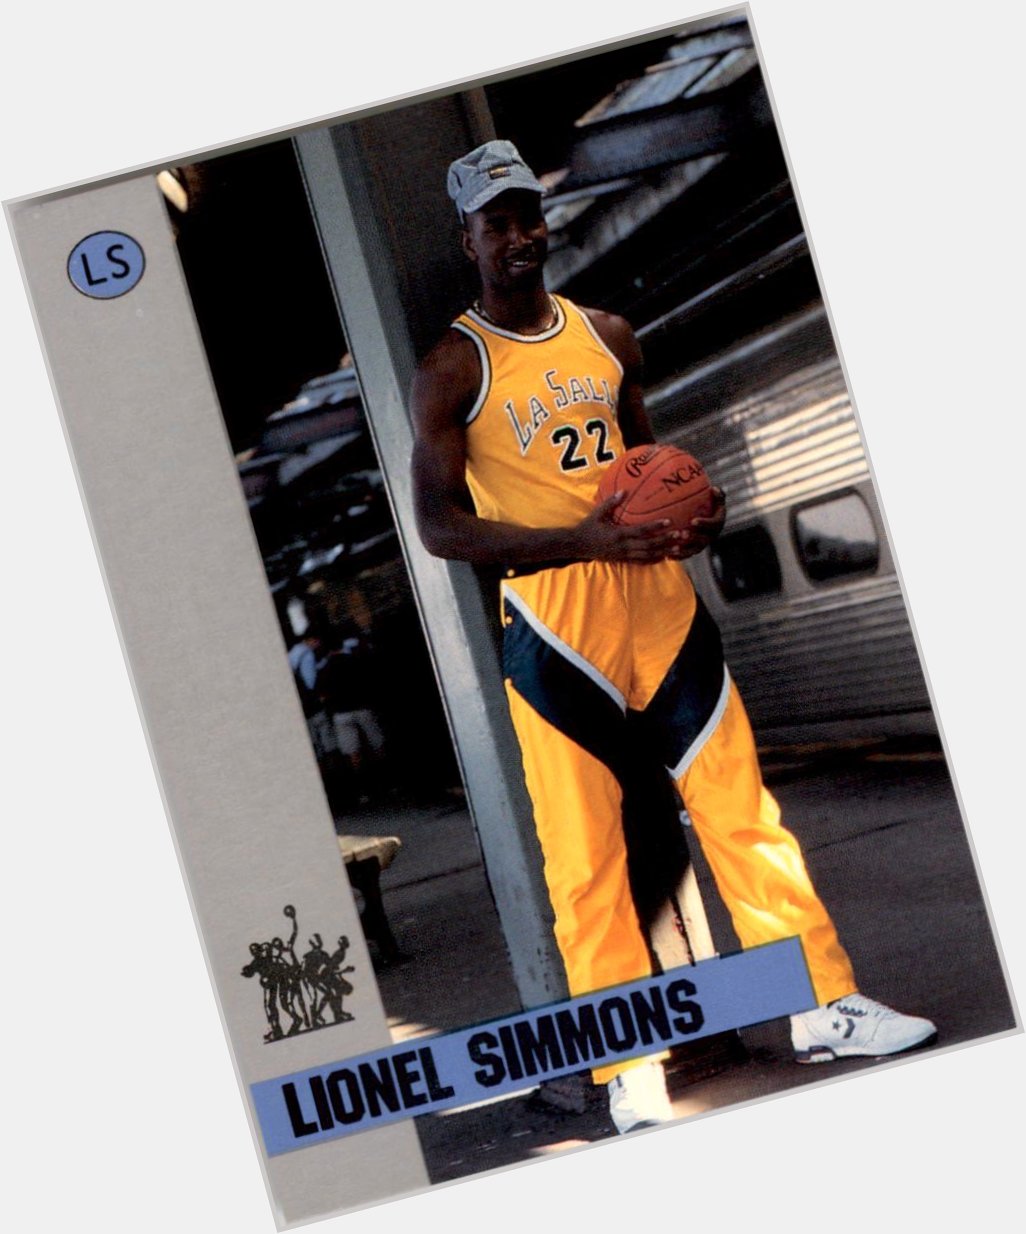 Happy birthday to the 1990 Naismith College Player of the Year and John Wooden Award winner, Lionel Simmons 